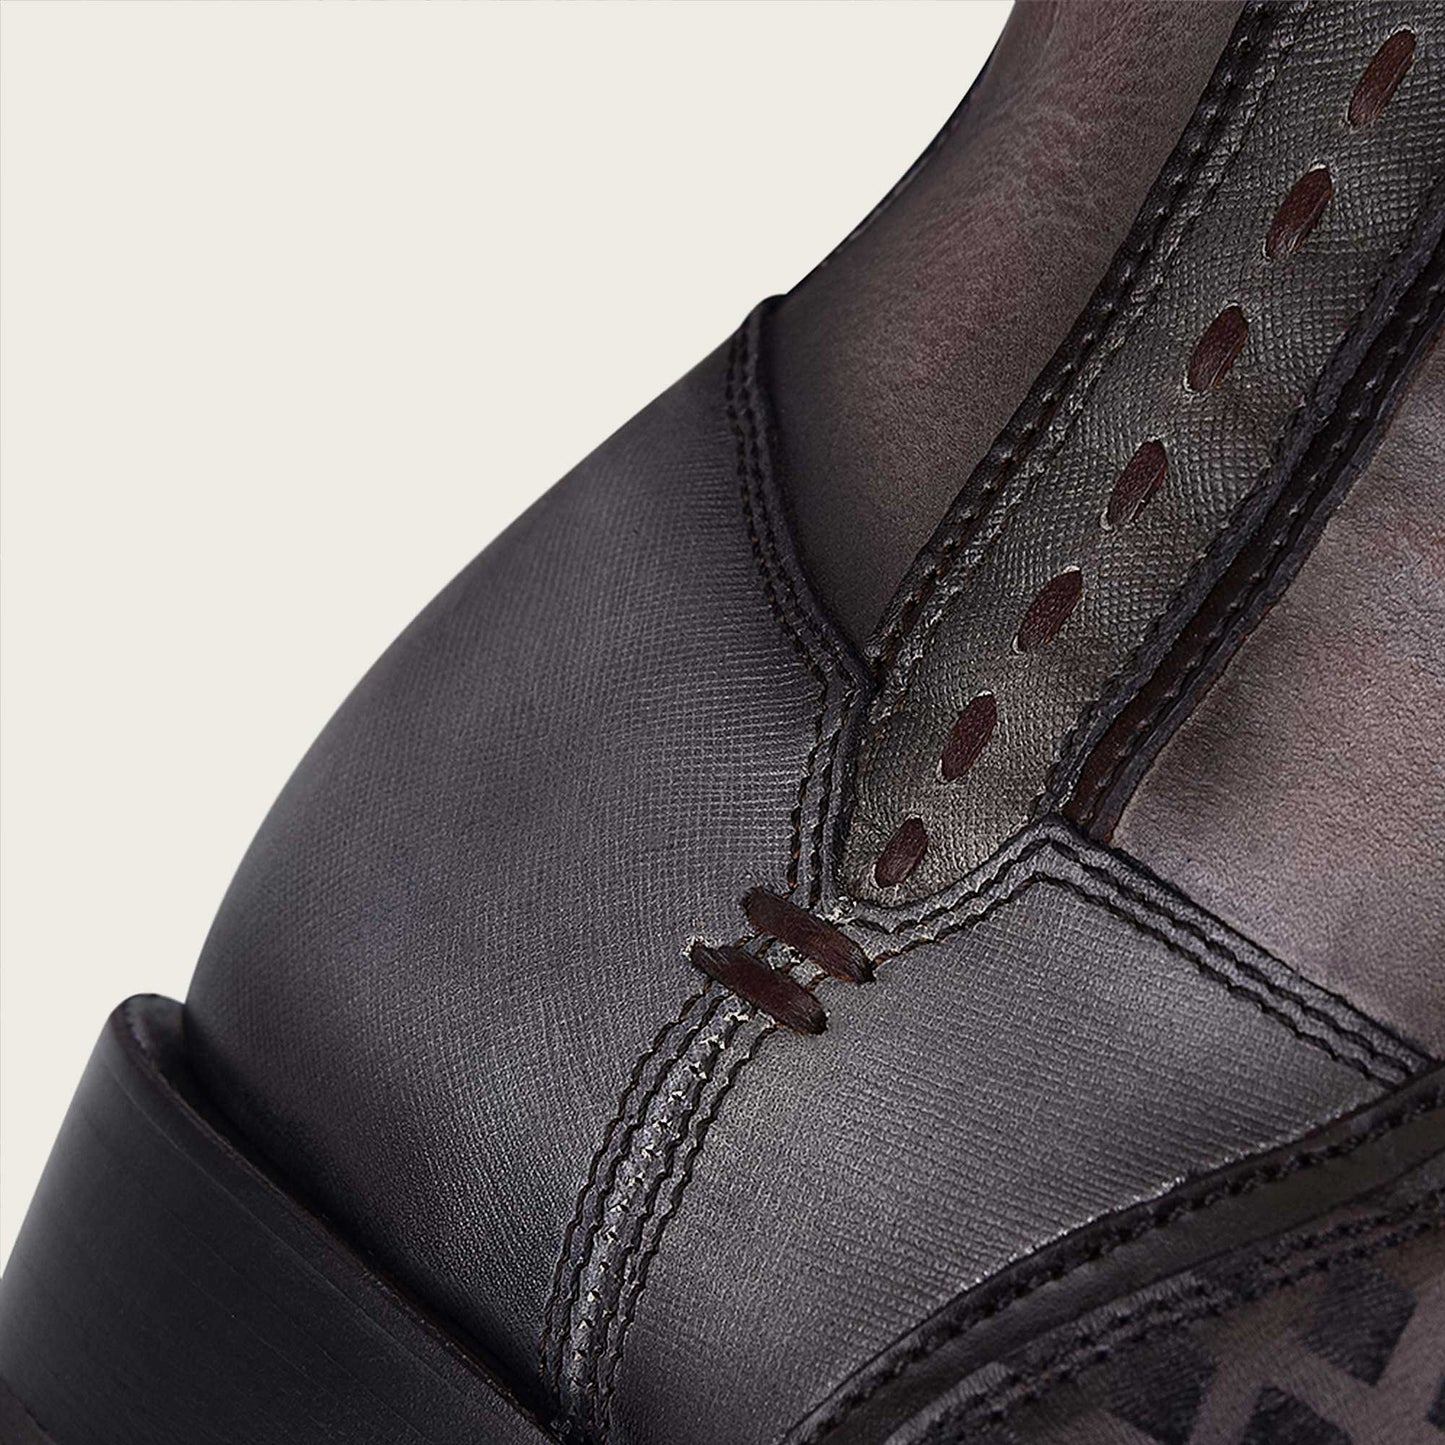 Cowboy boots grey oxford for men with engraved details